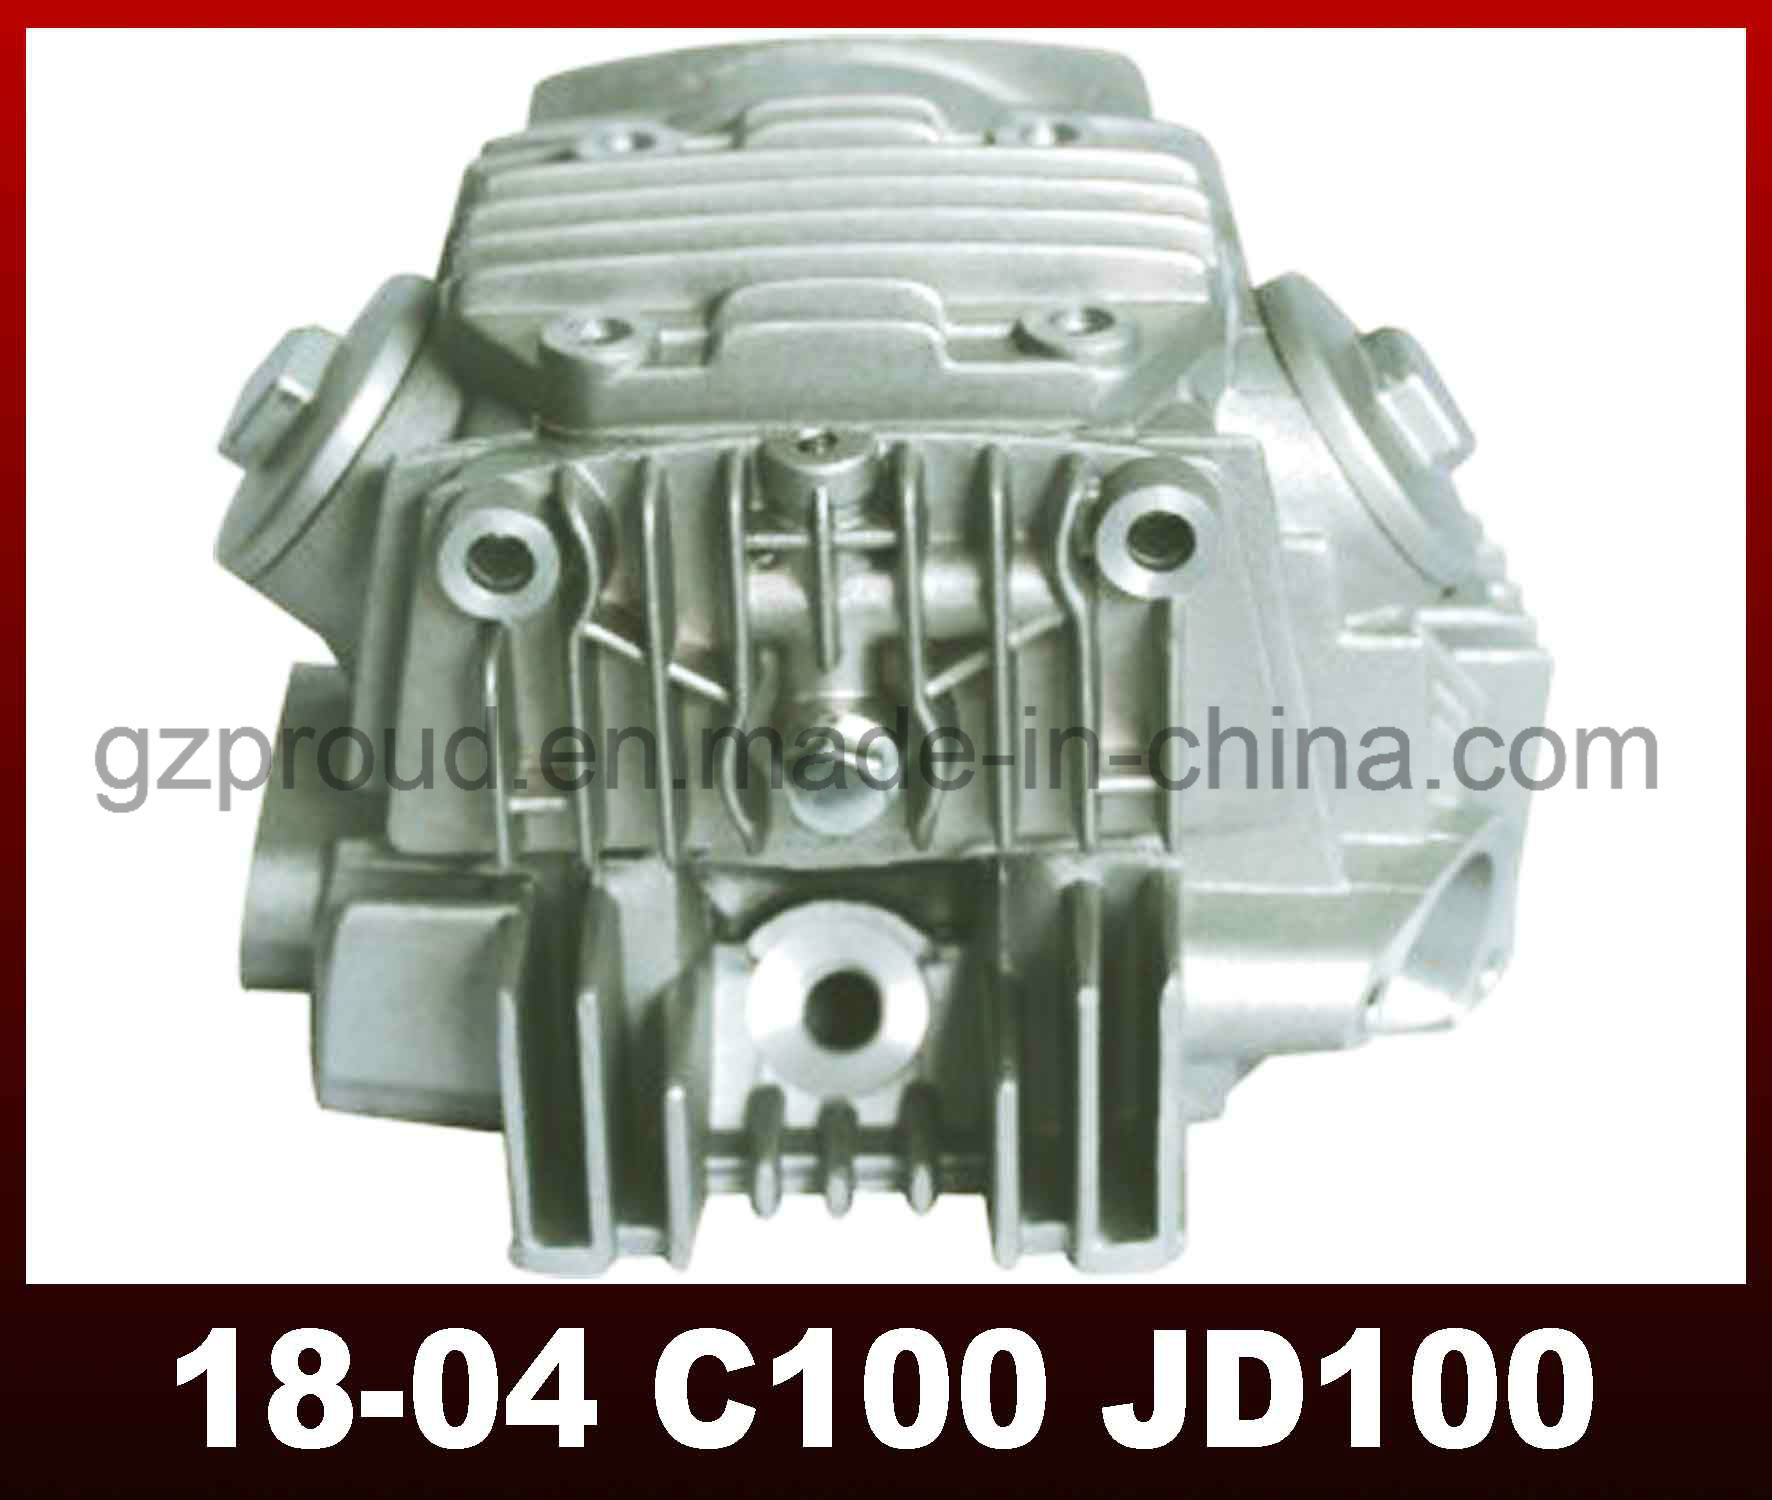 High Quality Motorcycle Cylinder Head C100 Motorcycle Parts